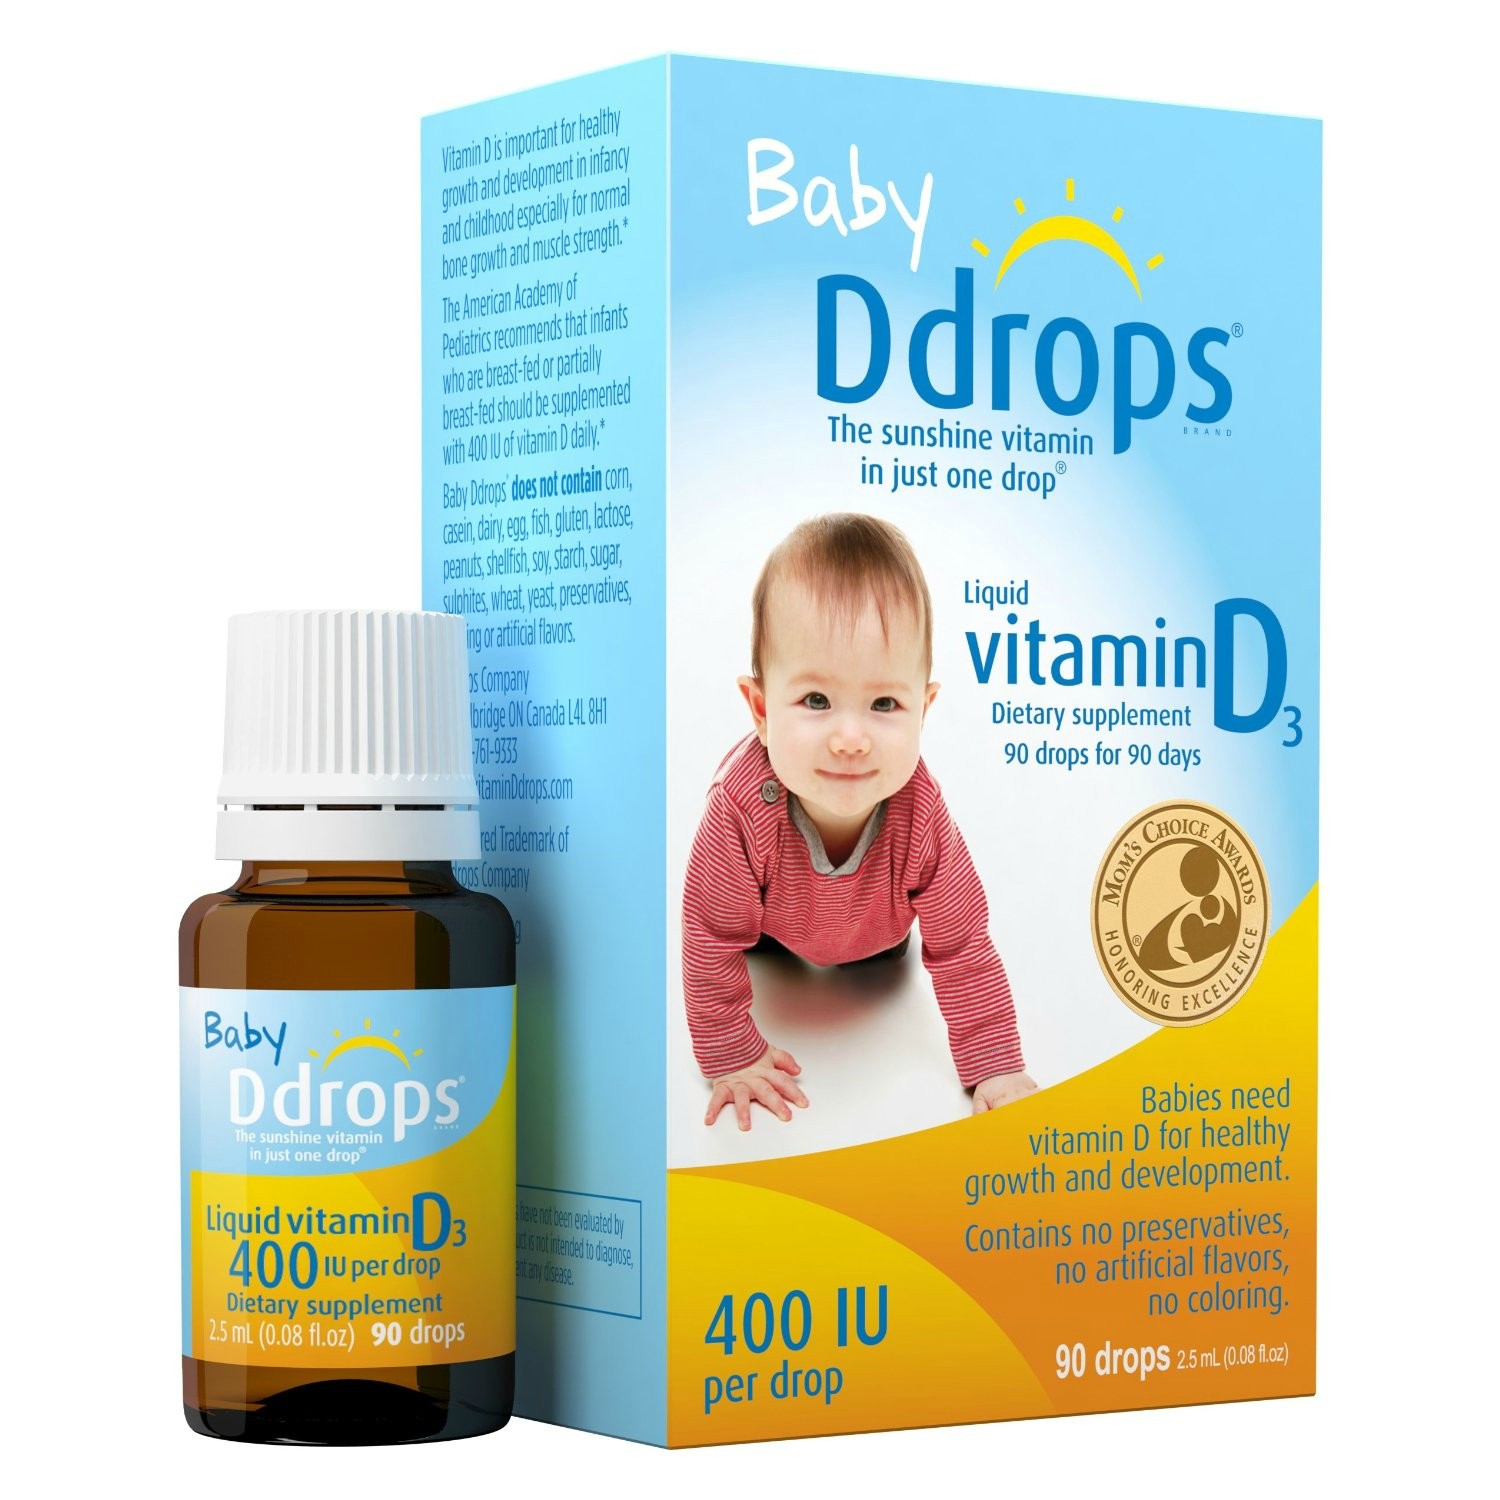 Does My Baby Need Vitamin D? | Vitamin D Guidelines For Babies